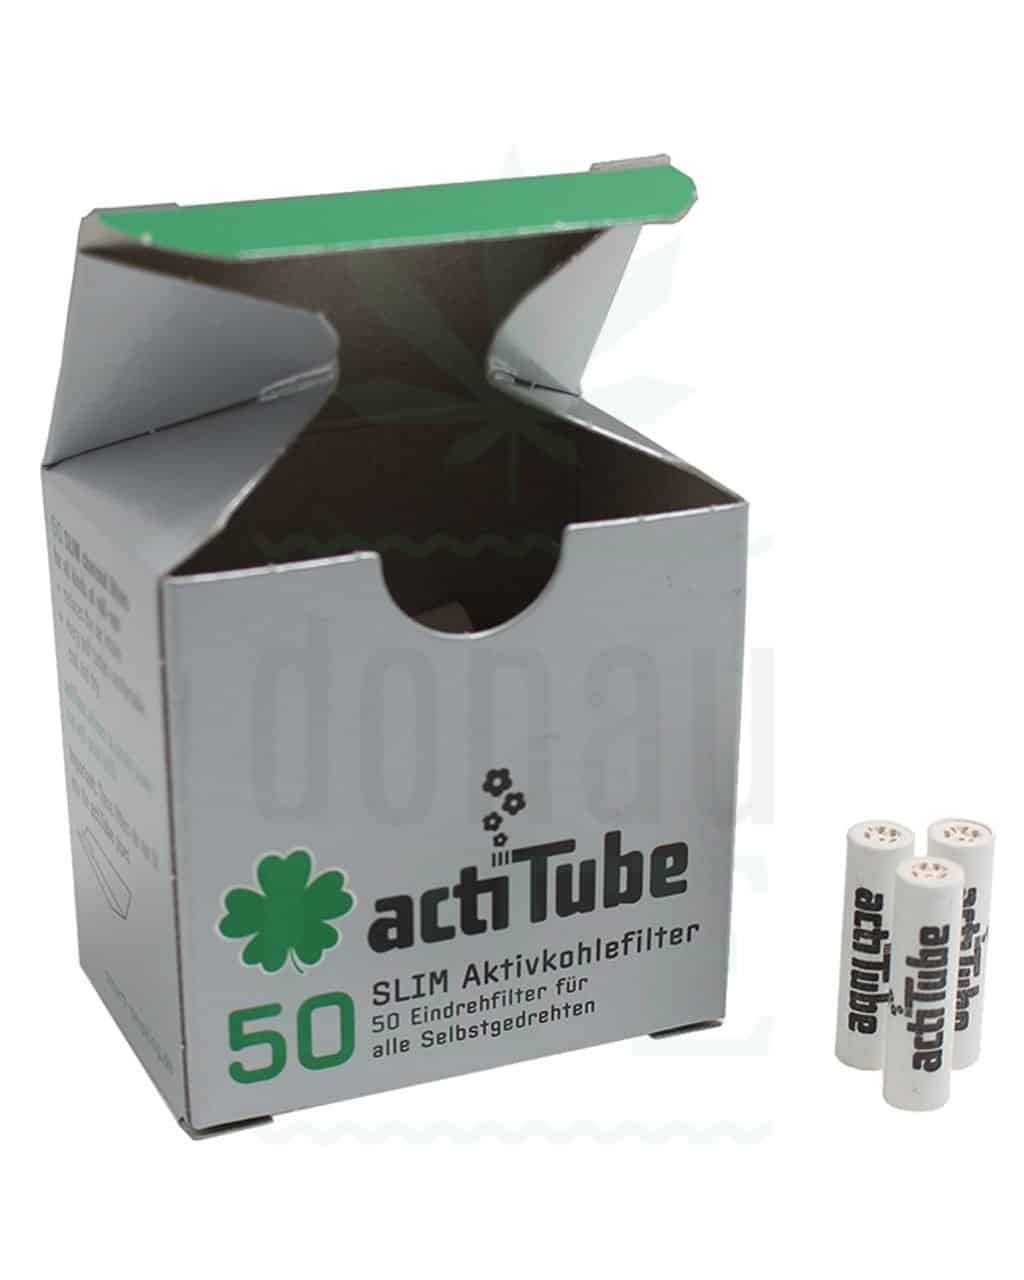 Headshop ACTITUBE Slim activated carbon filter | 50 pieces